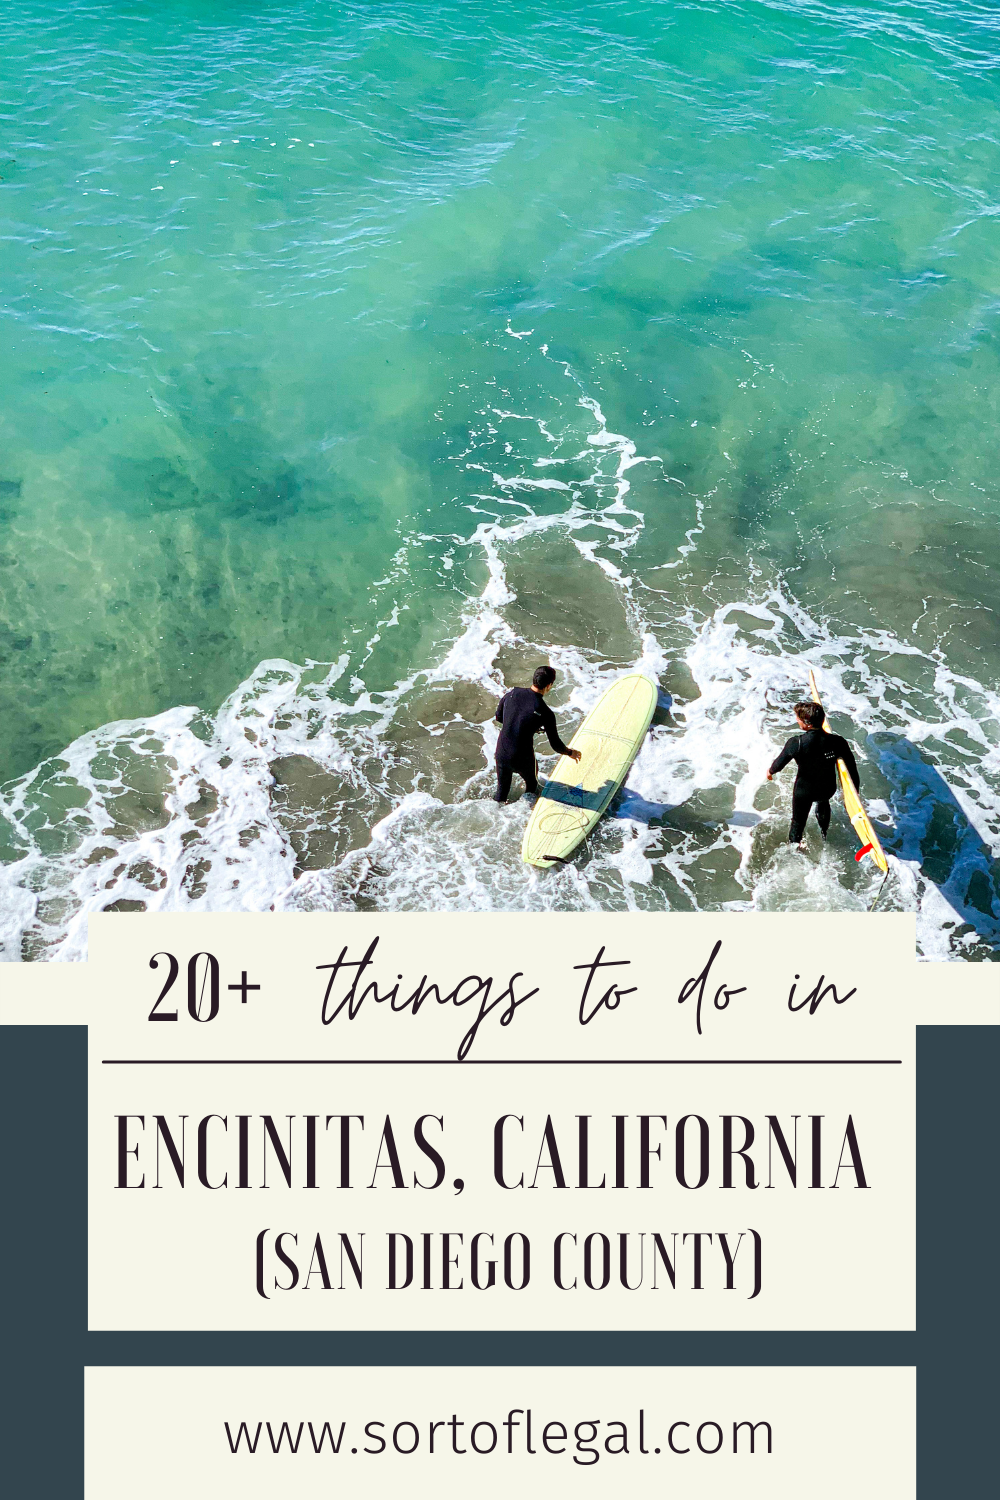 20+ Things to do Encinitas, CA Header with Surfers